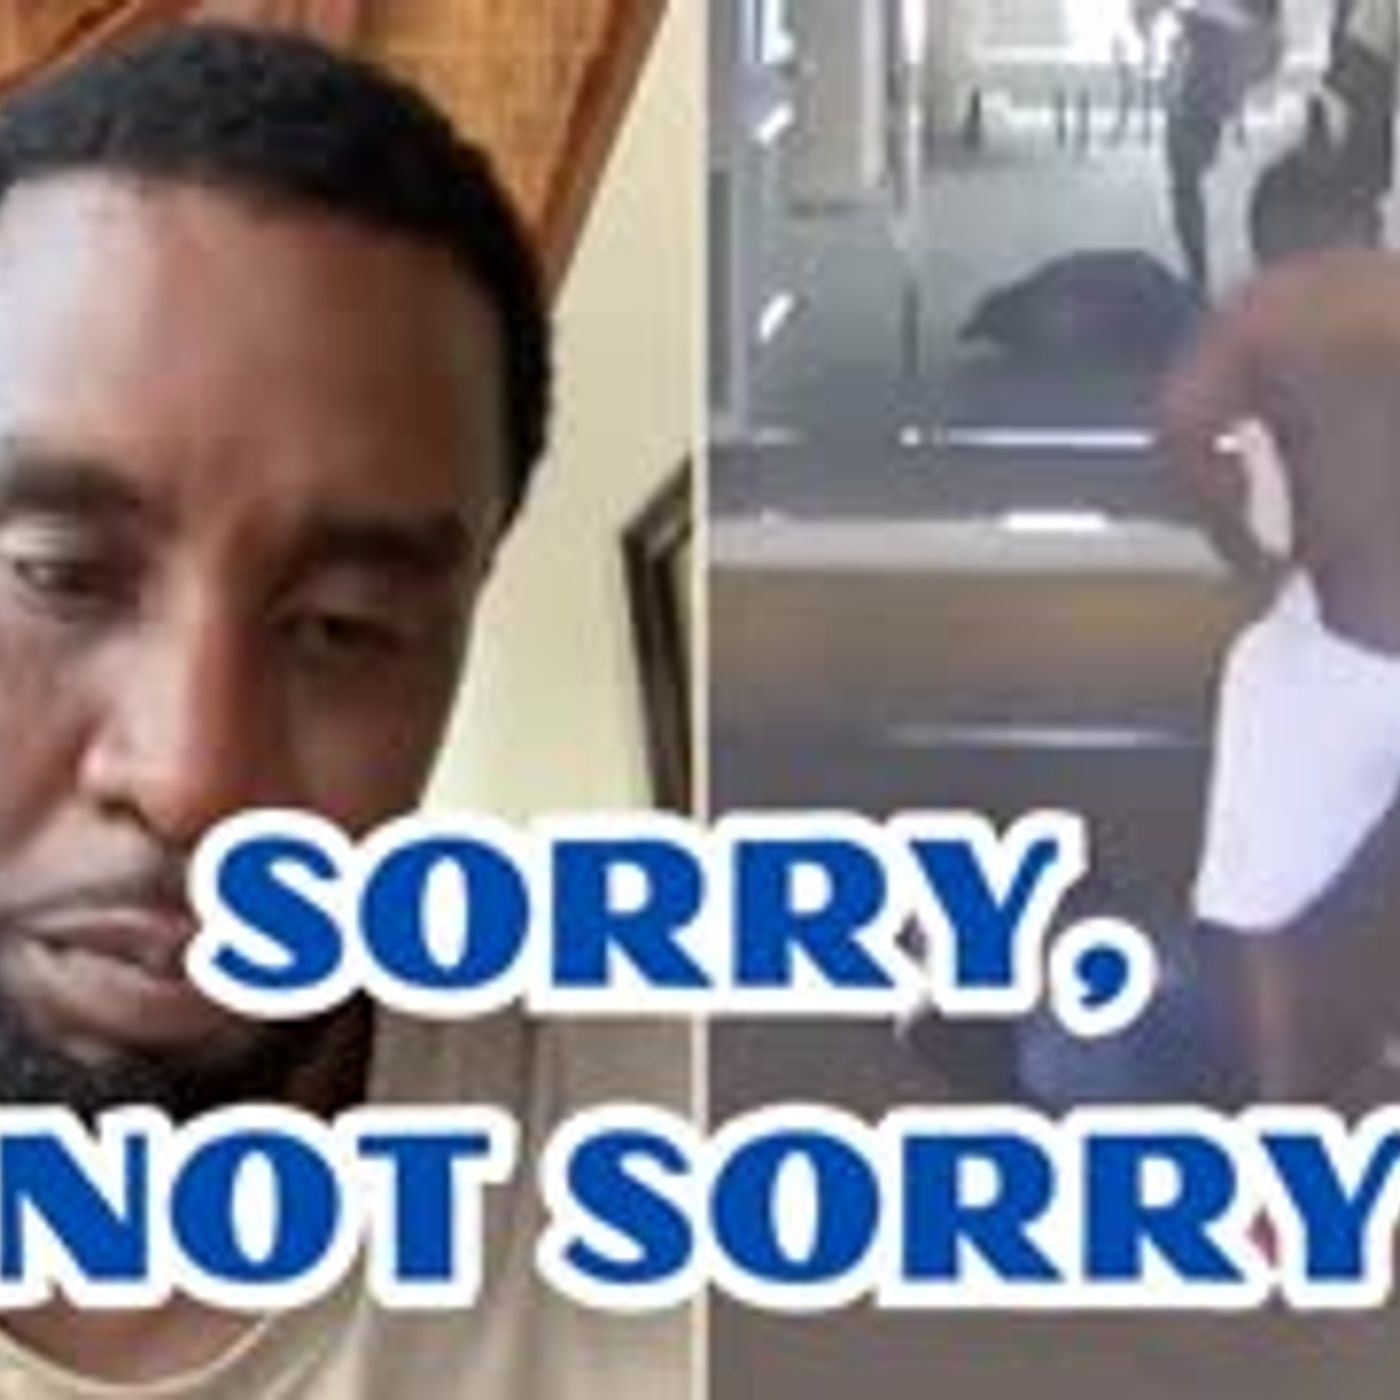 Sean  Diddy  Combs NON-apology after video evidence of abuse